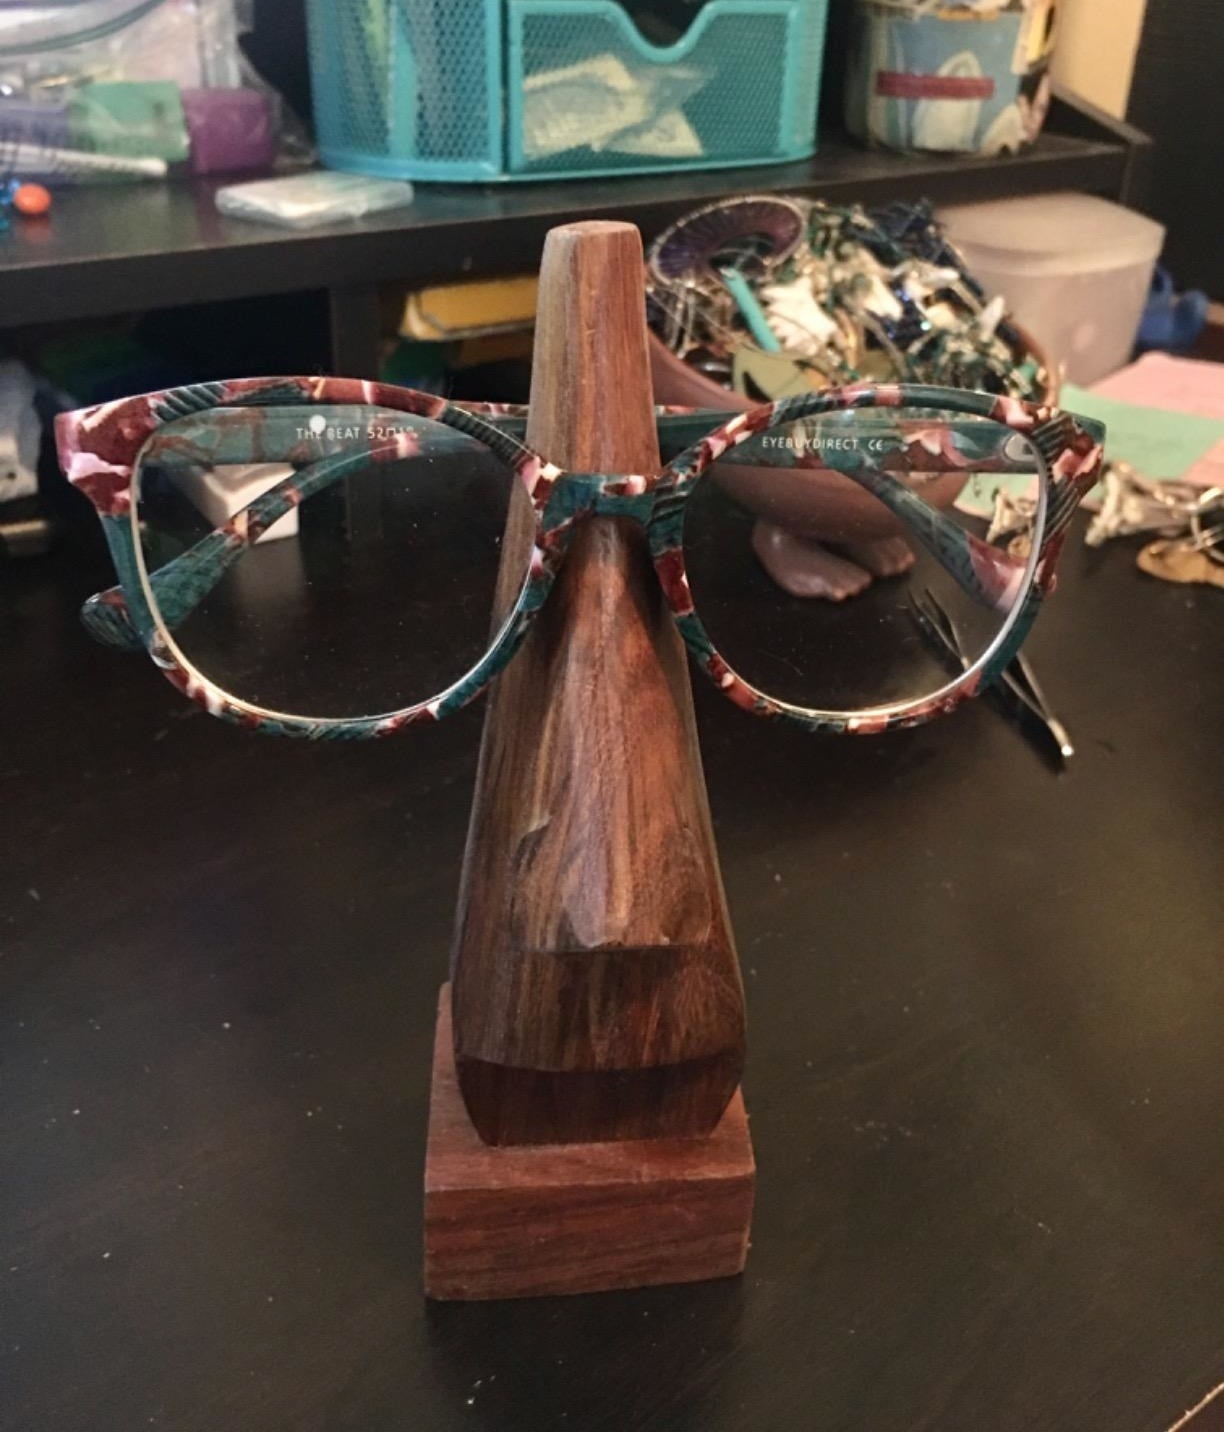 Reviewer photo of the wooden stand with glasses on it